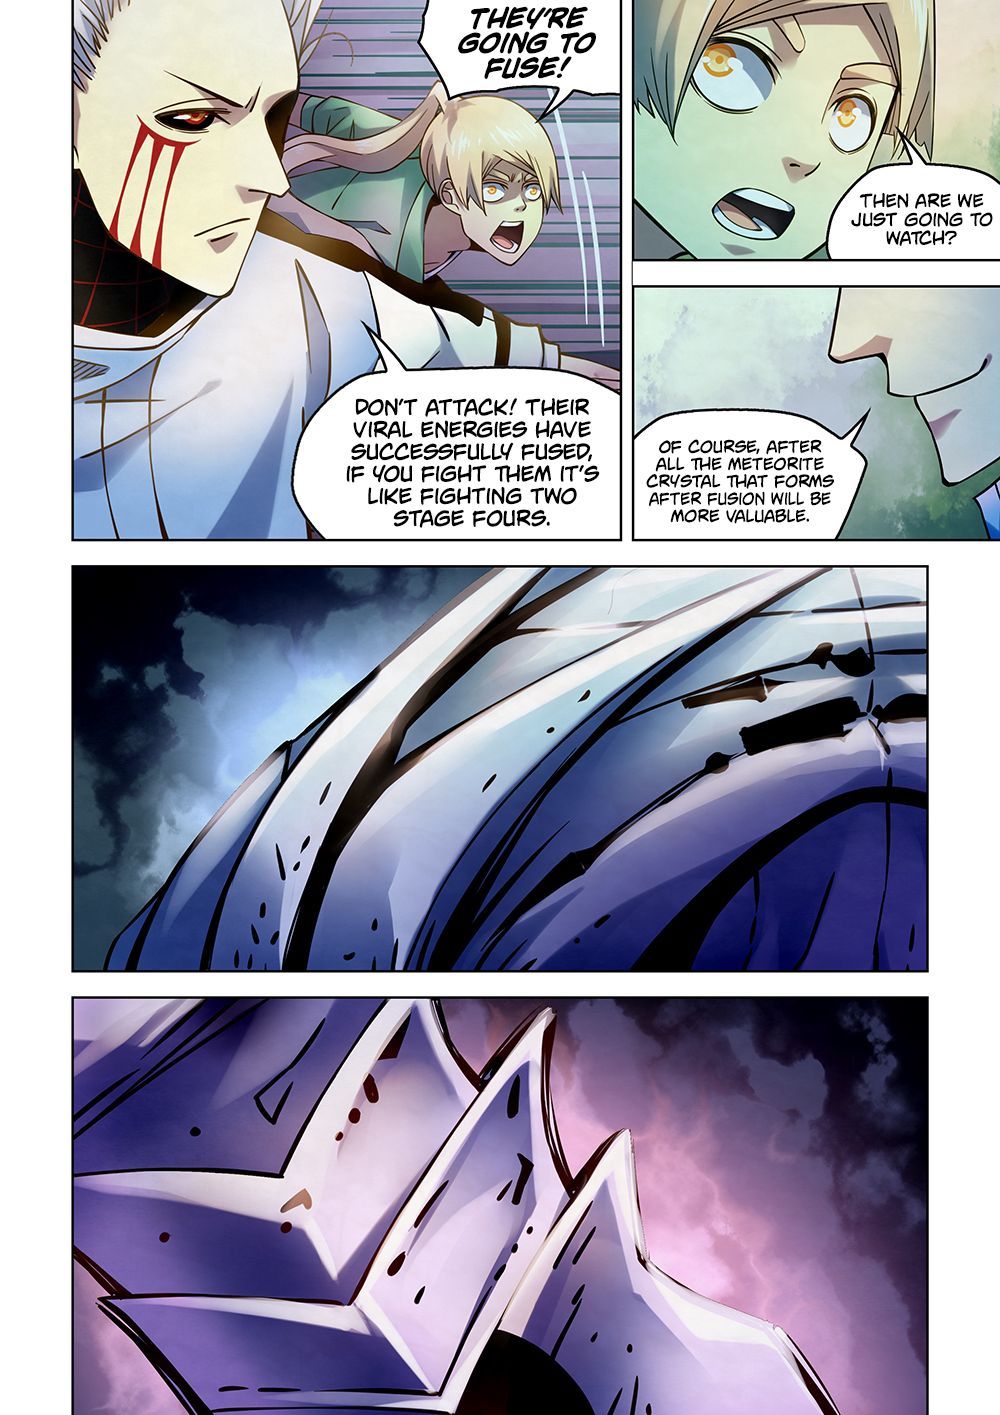 The Last Human Chapter 265 - Page 4